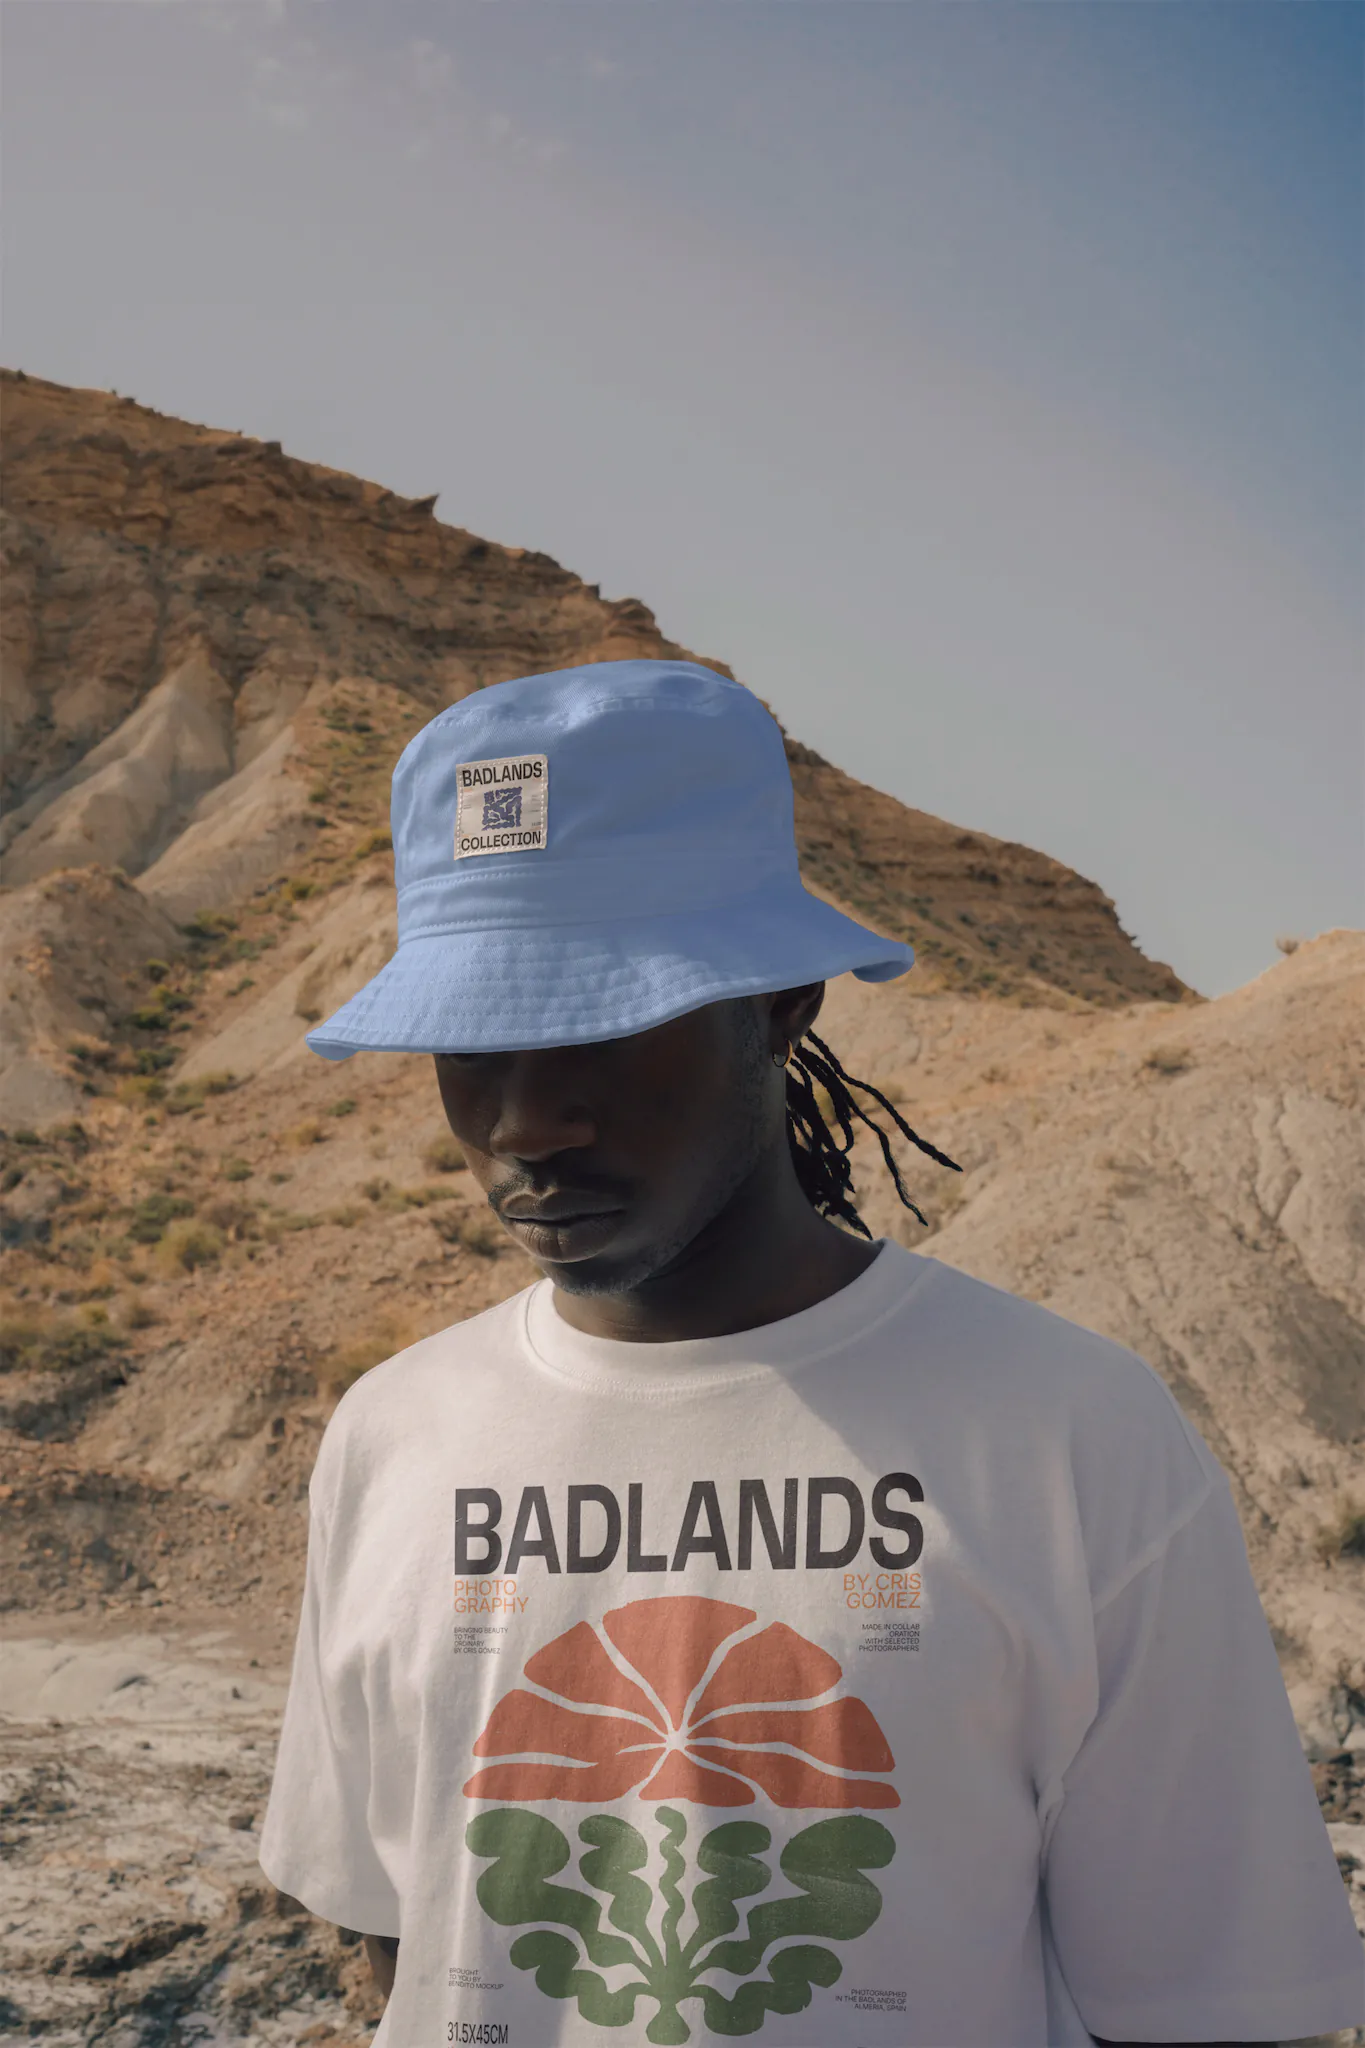 Dark-skinned person wearing a bucket hat mock-up and a t-shirt mock-up in a desert environment